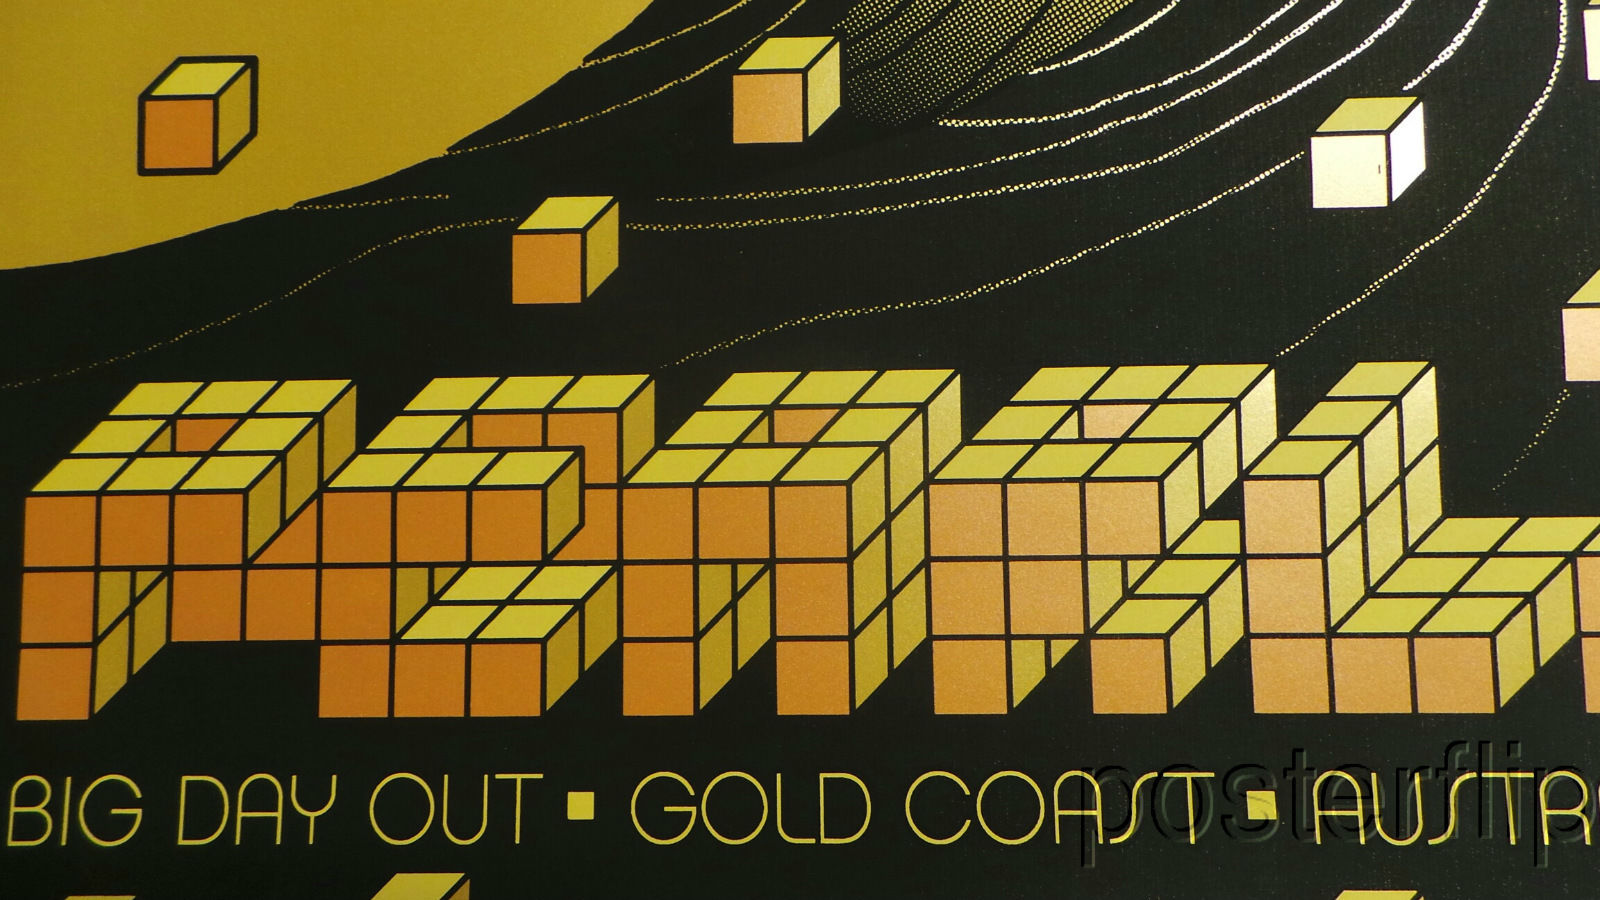 Title:  Pearl Jam Big Day Out 2014  Artist:  Ames Bros  Edition:  Gold Variant Limited Edition of 80 prints and quickly sold out by the artist. Each print is signed and numbered by the artist.  Type: Screen print poster  Size: 20" x 26"  Location: Gold Coast, Australia  Notes:  P rint is stored flat in very good condition.  Check out our other listings for more hard to find and out of print posters.